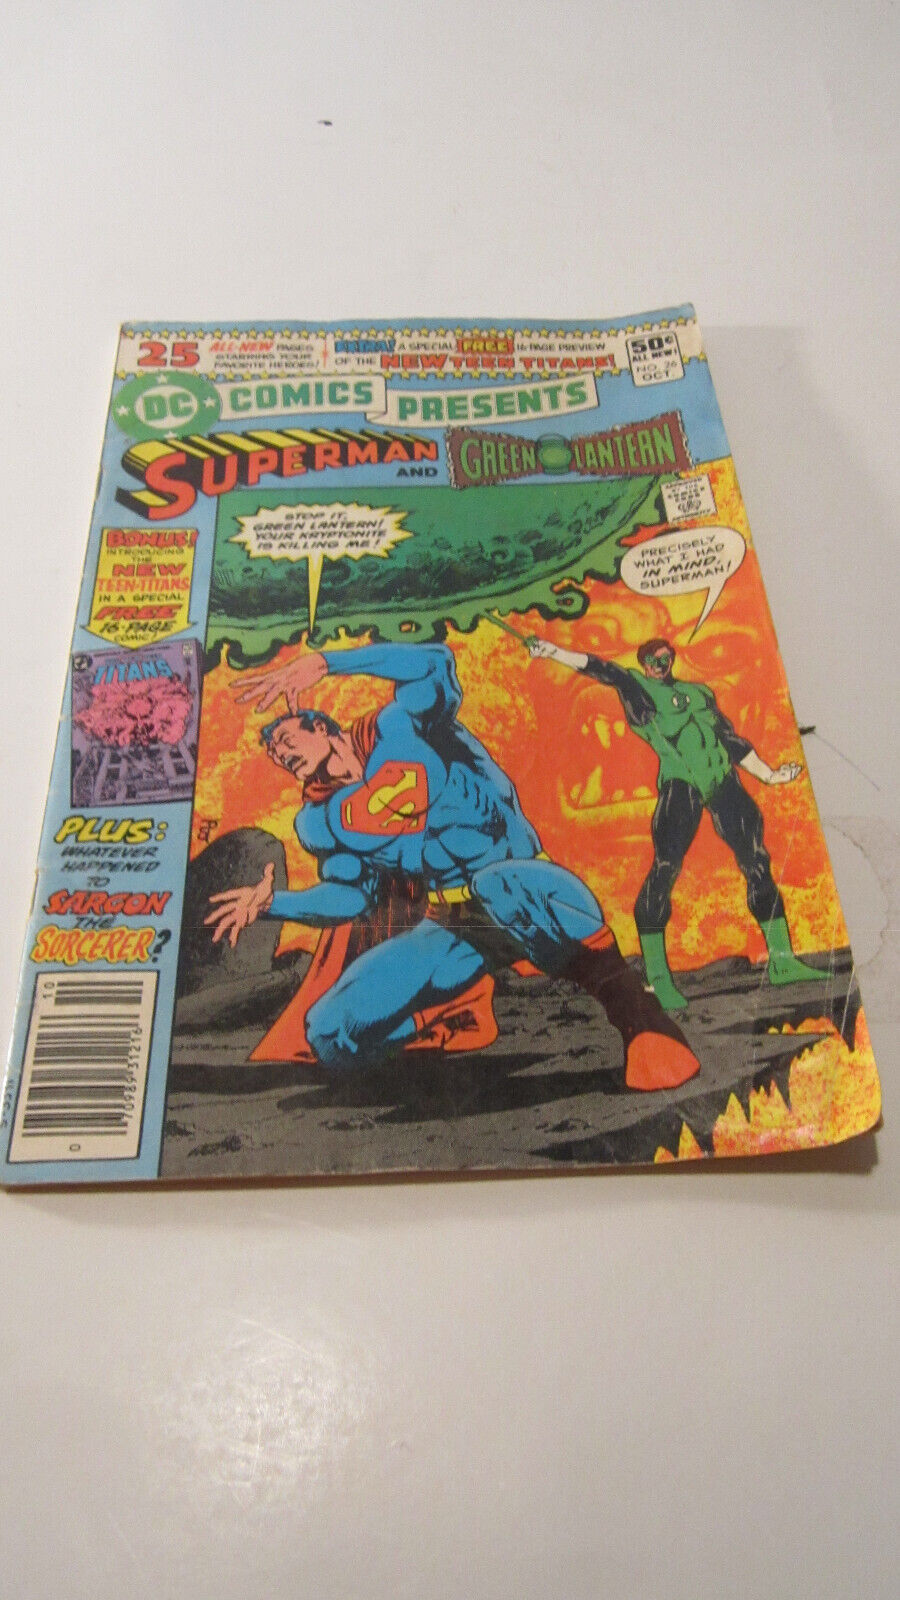 DC Comics Superman and Green Langern #26 1980 1st Appearance of the Teen Titans